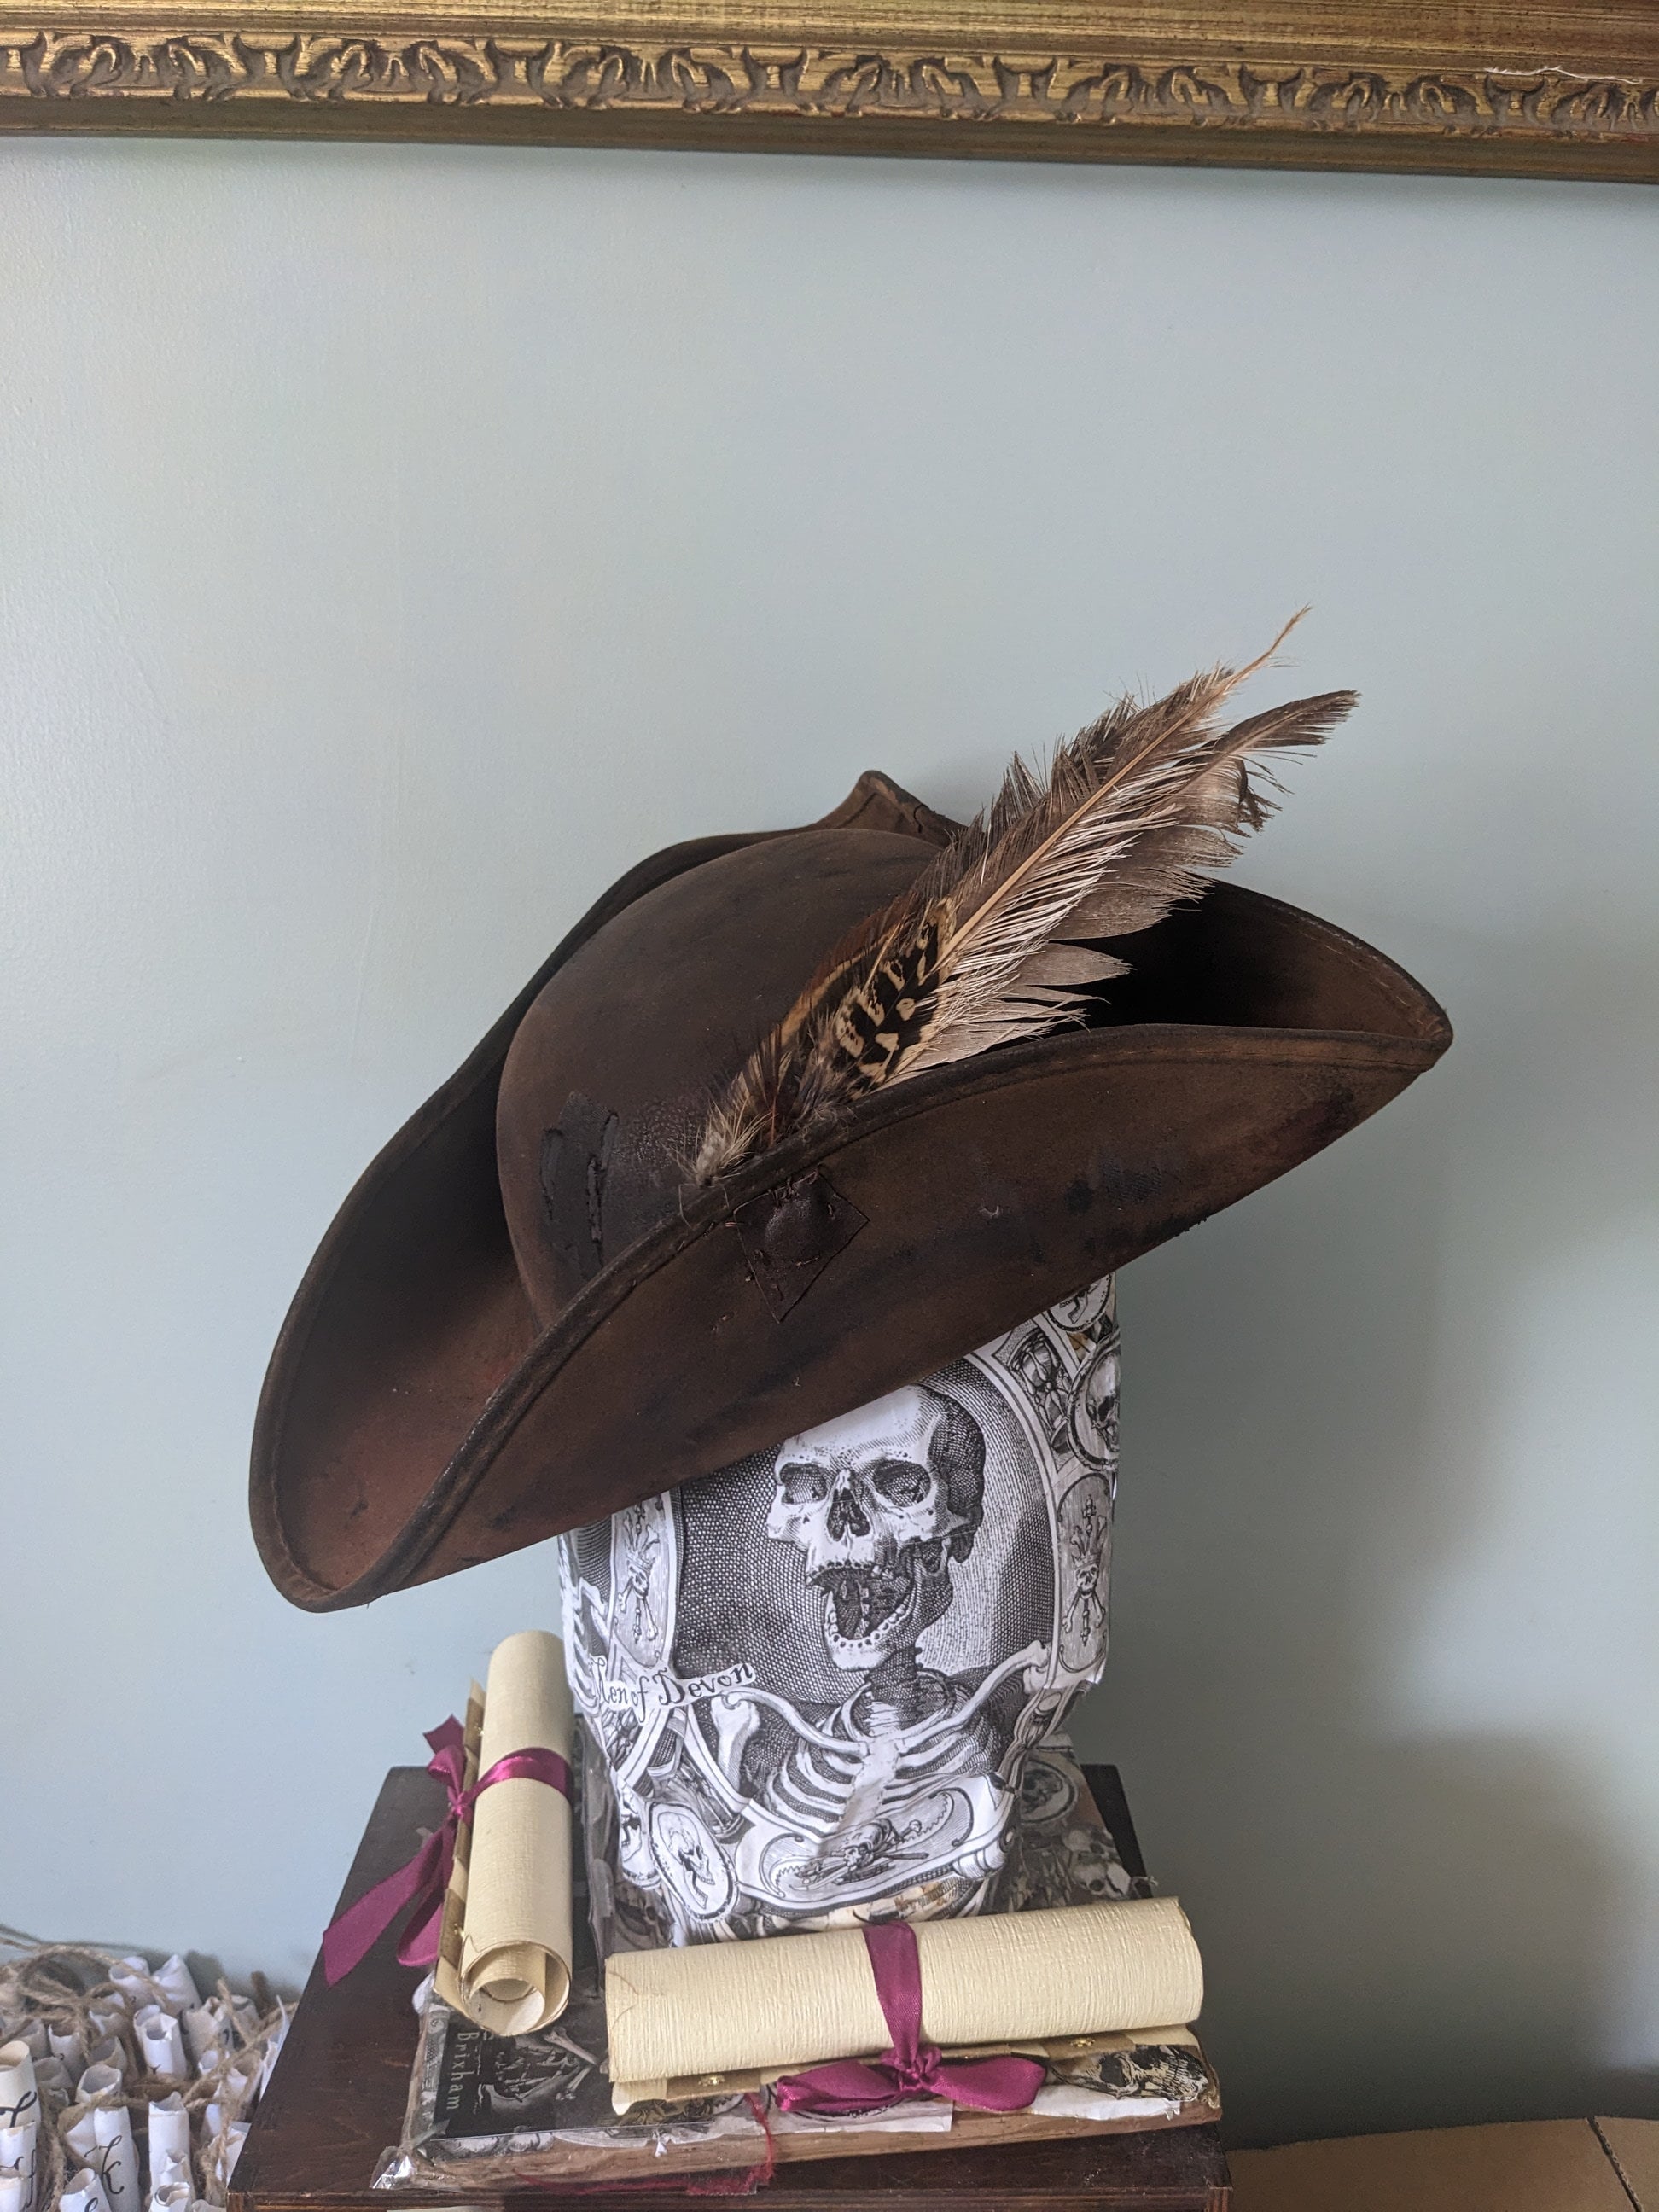 Feathered Pirate Tricorn Hat – Pirate Clothing Store